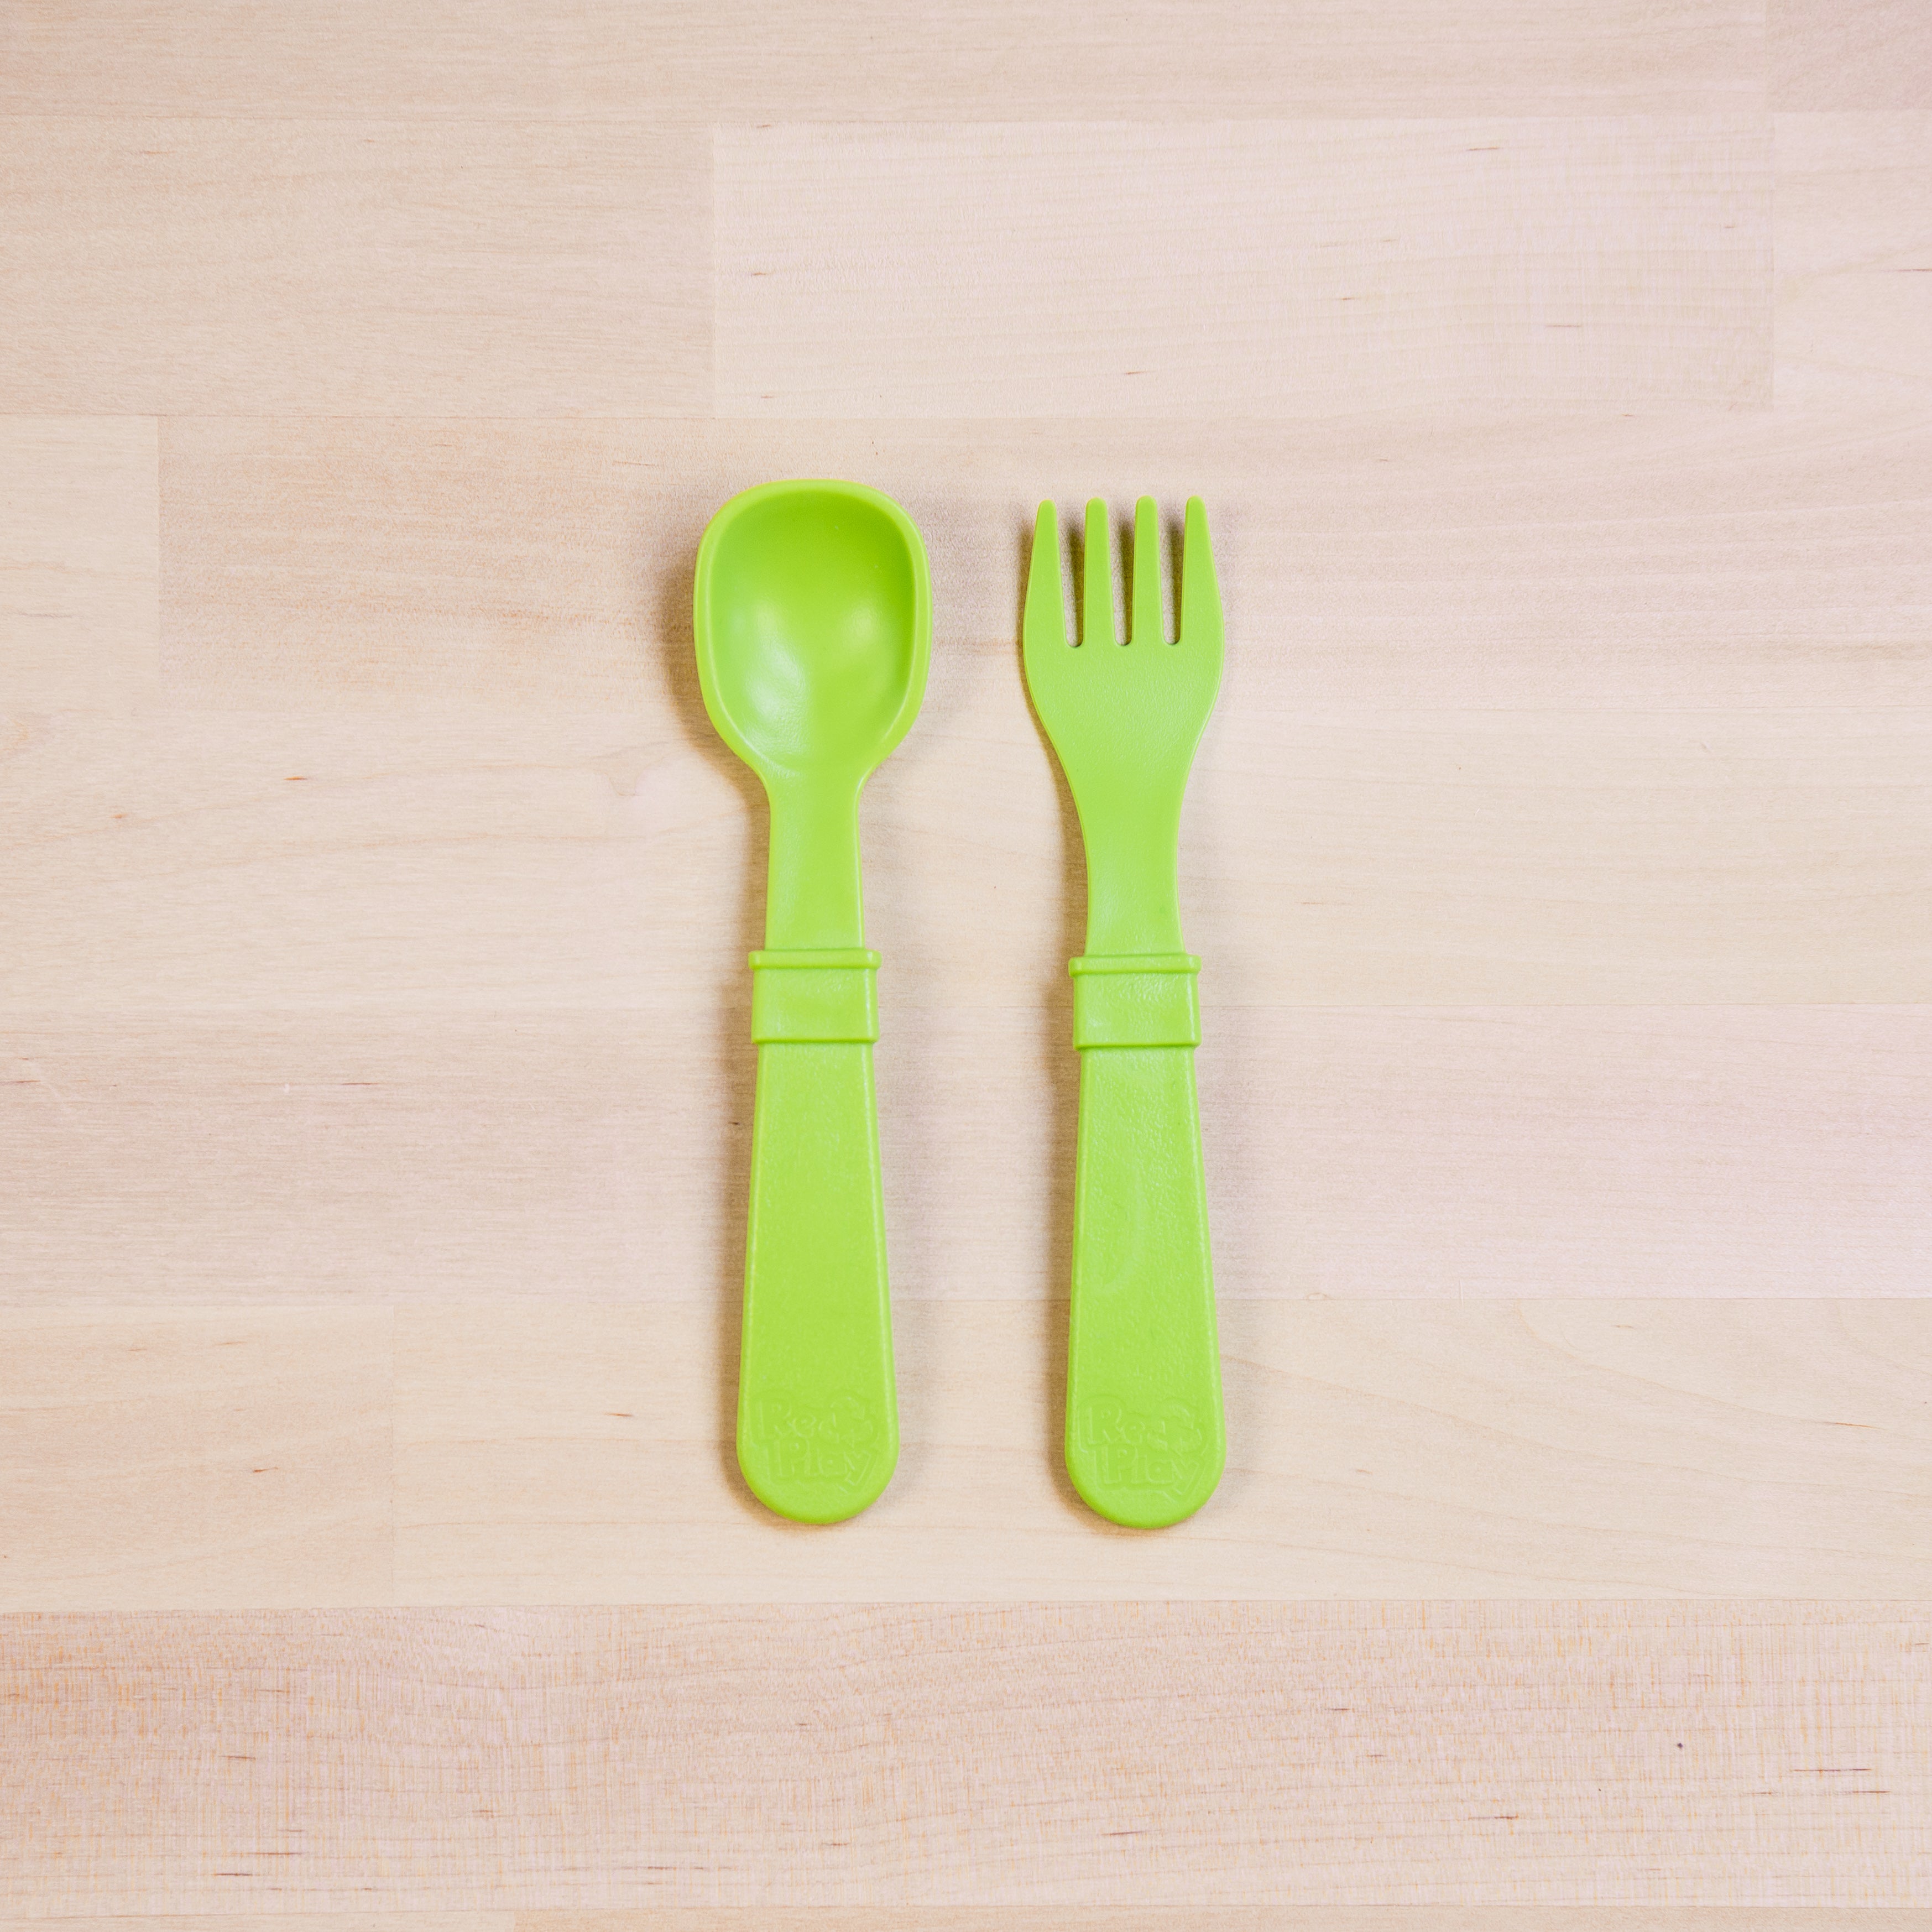 Packaged Utensils (Spoons And Forks)